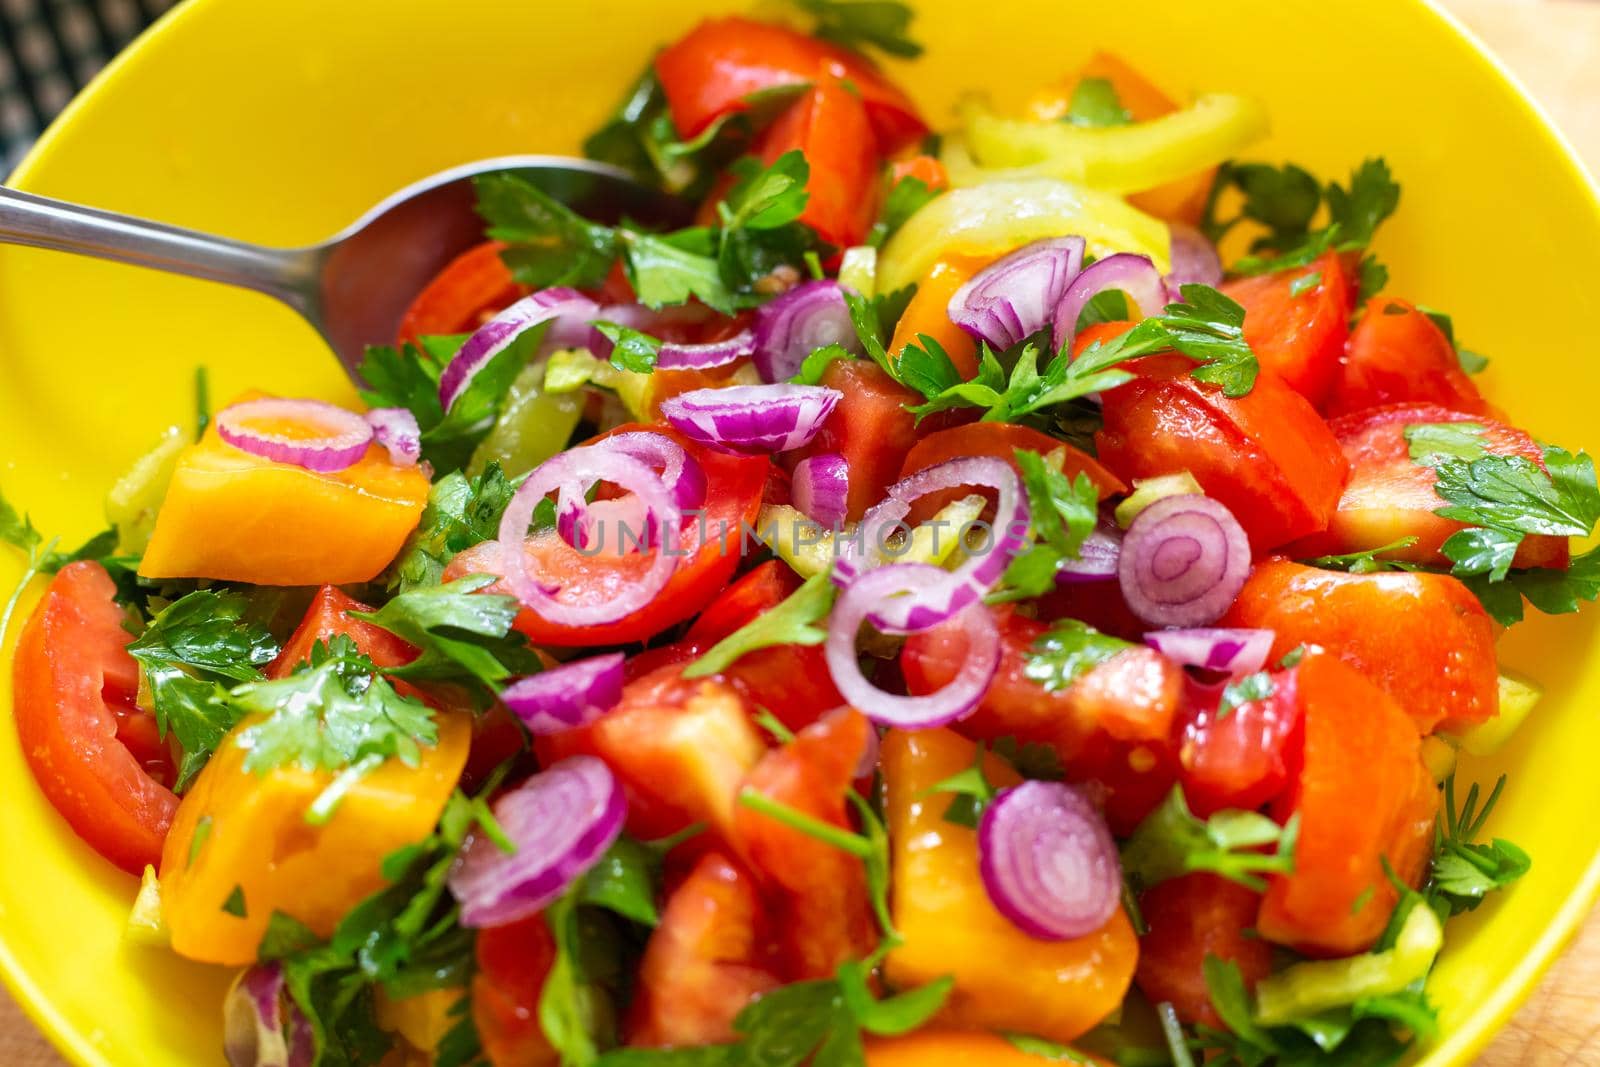 Colorful salad of fresh vegetables in a cup, close-up. Cooking tomato, pepper and onion snacks.